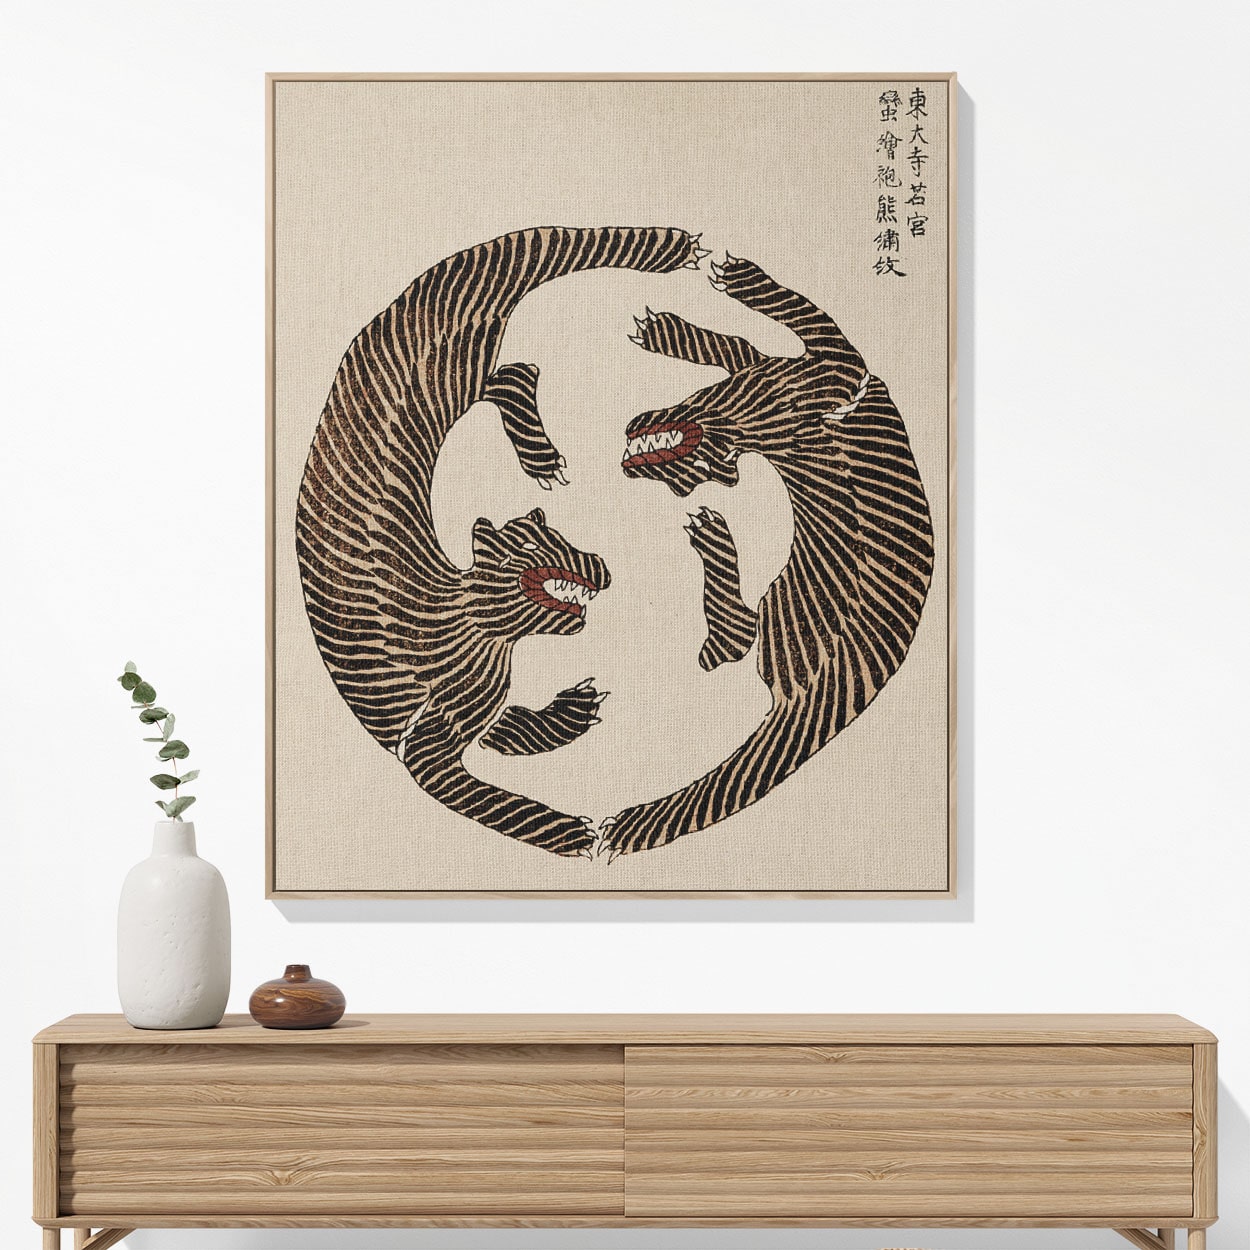 Cool Tiger Woven Blanket Woven Blanket Hanging on a Wall as Framed Wall Art